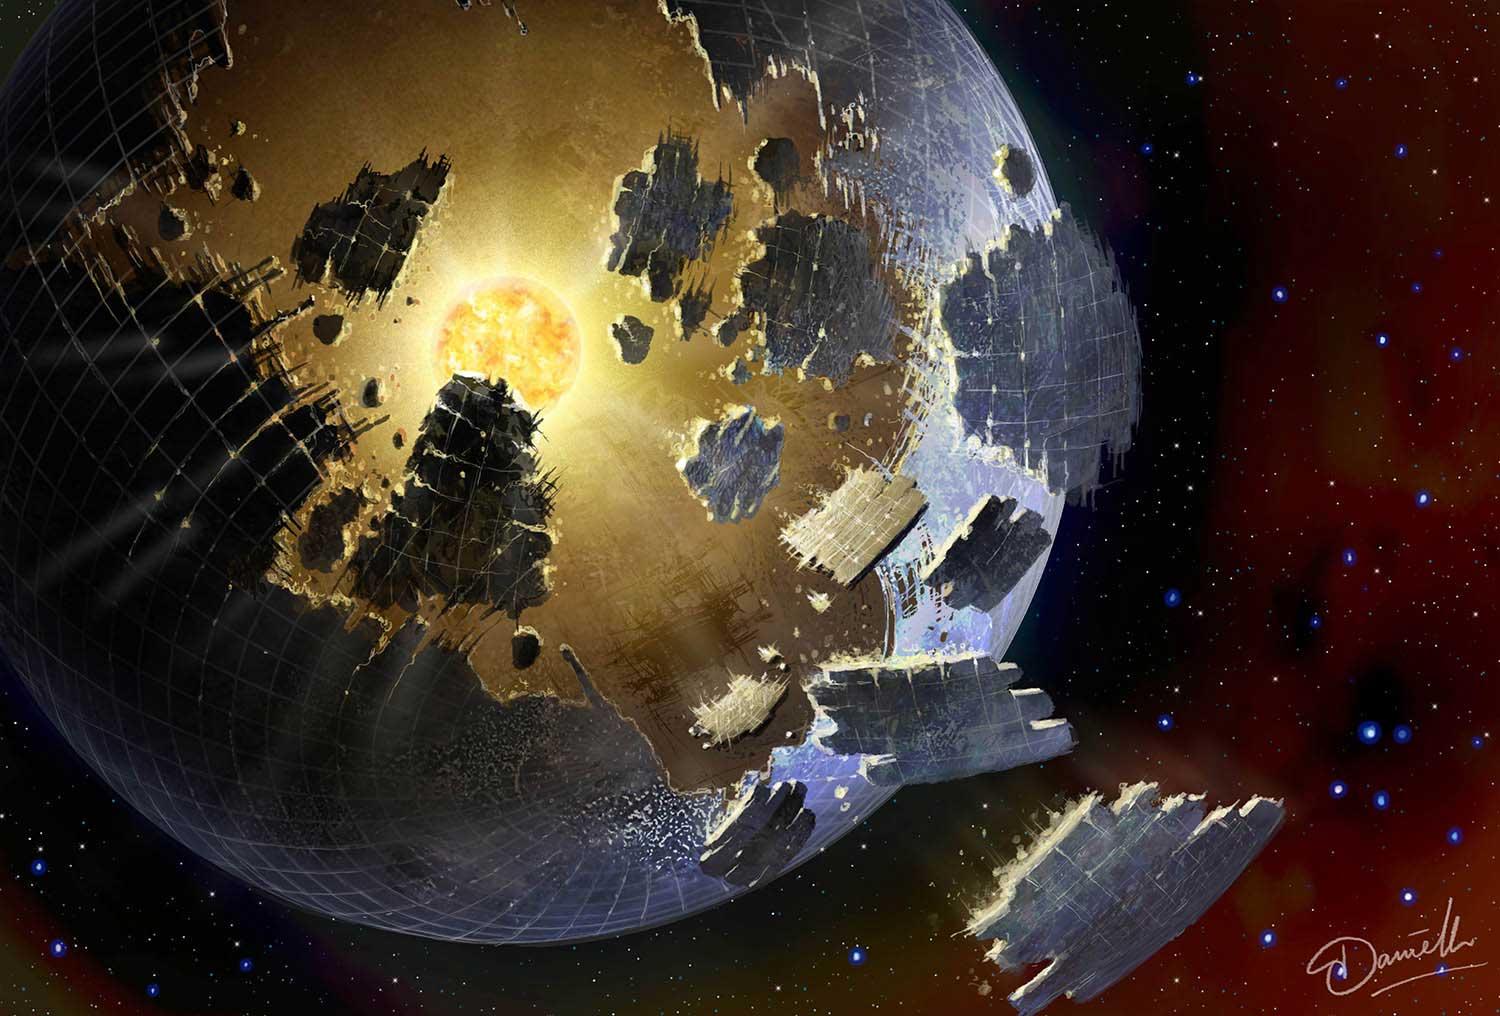 Illustration of a Dyson Sphere breaking into pieces